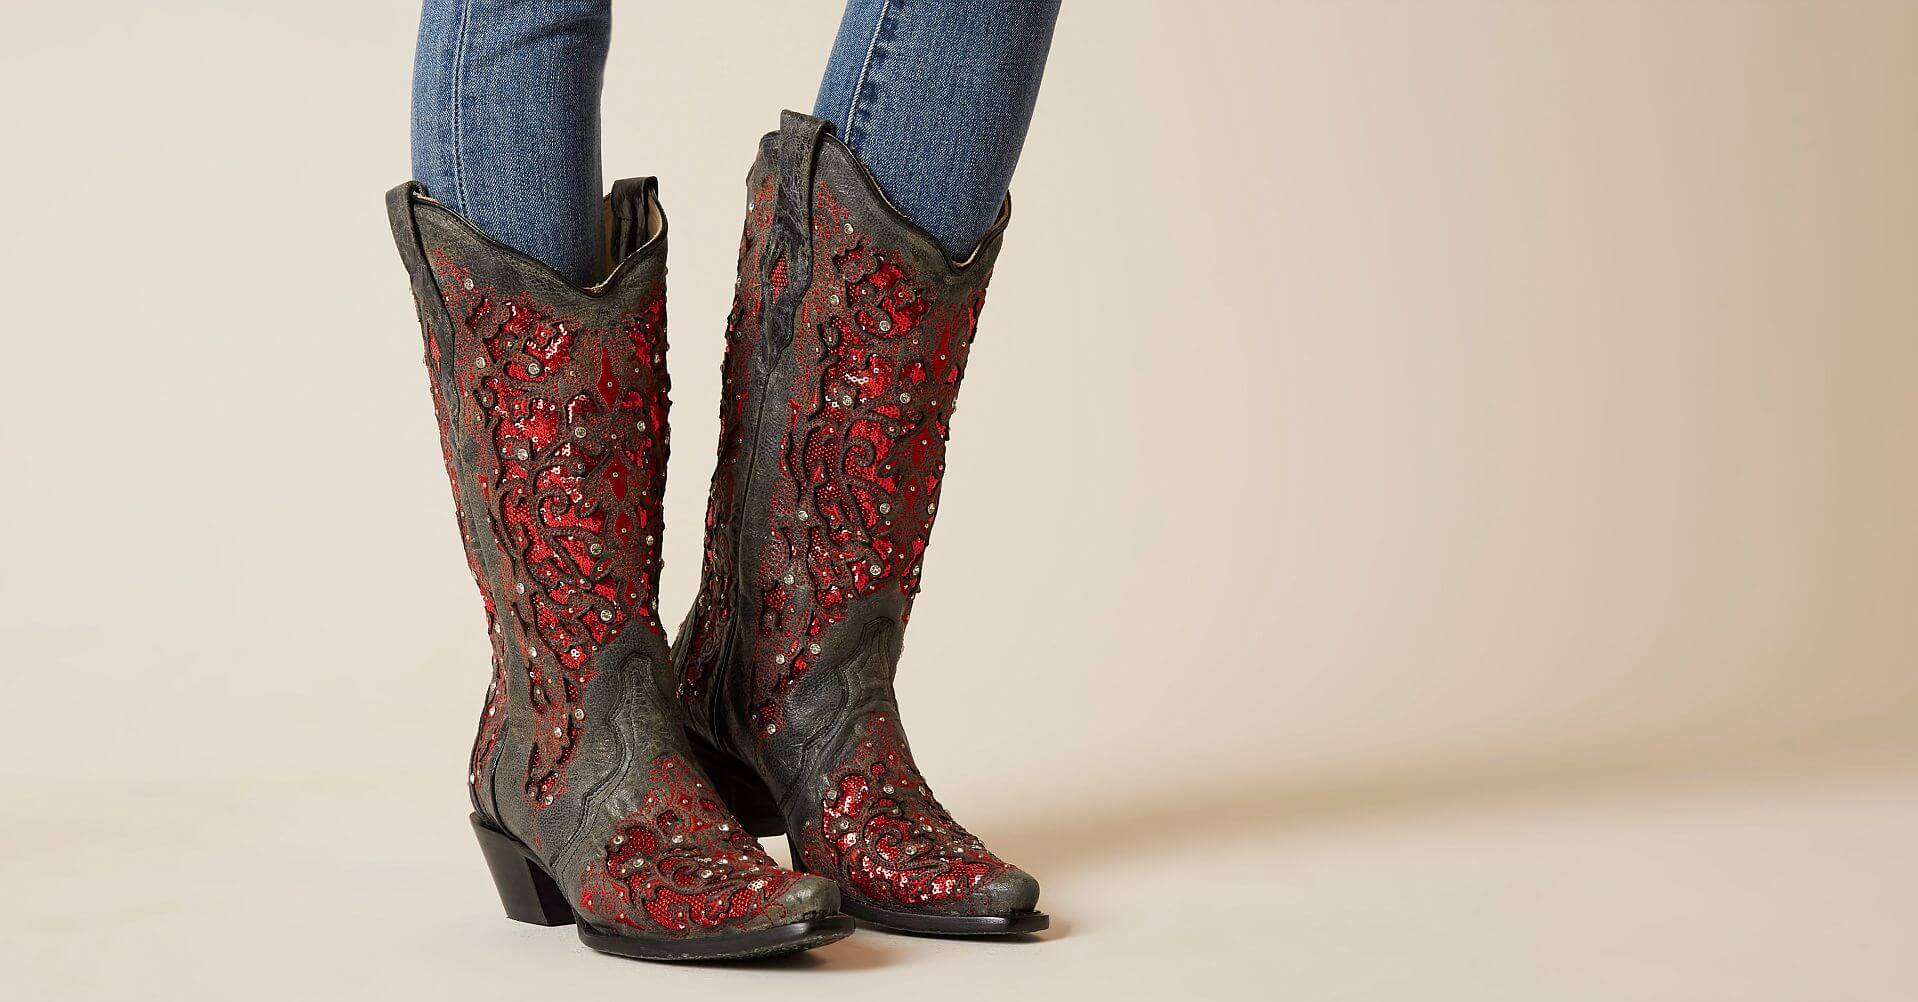 Corral Rhinestone Leather Western Boot - Women's Shoes in LD Grey | Buckle